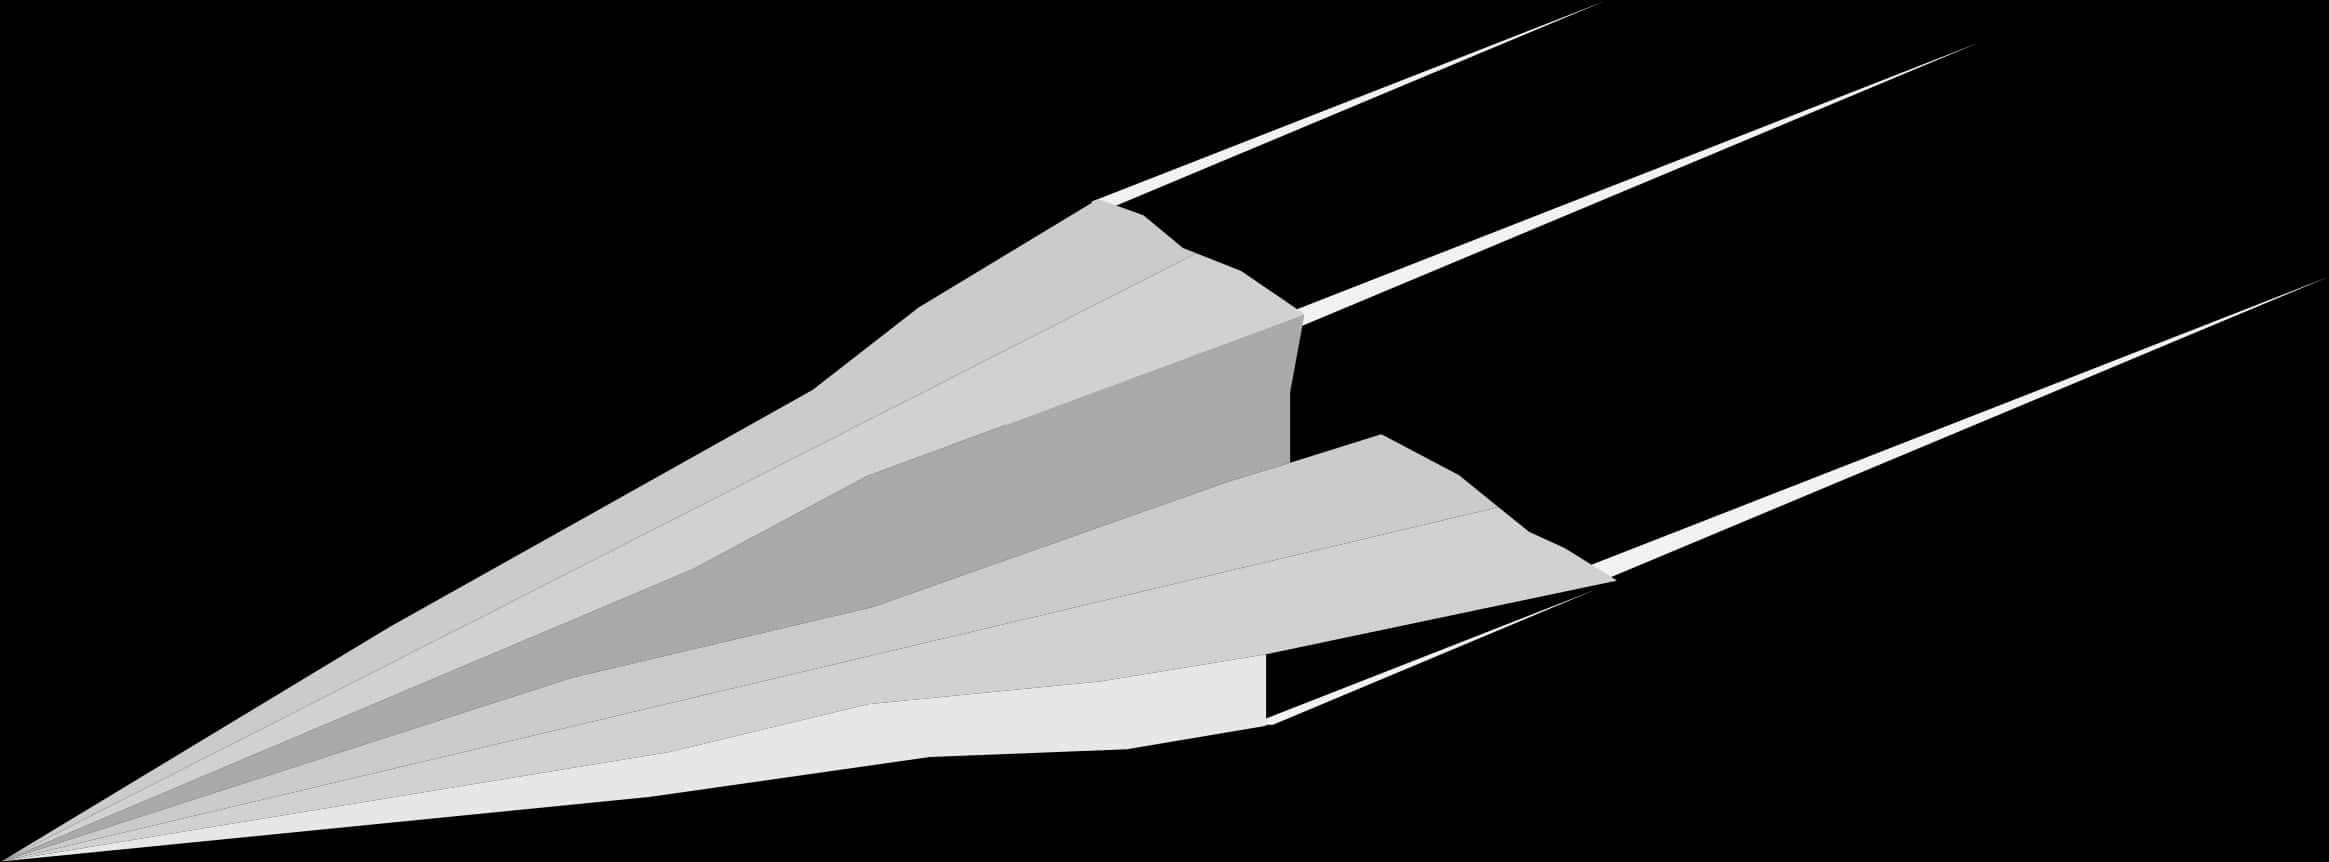 Abstract Paper Airplane Graphic